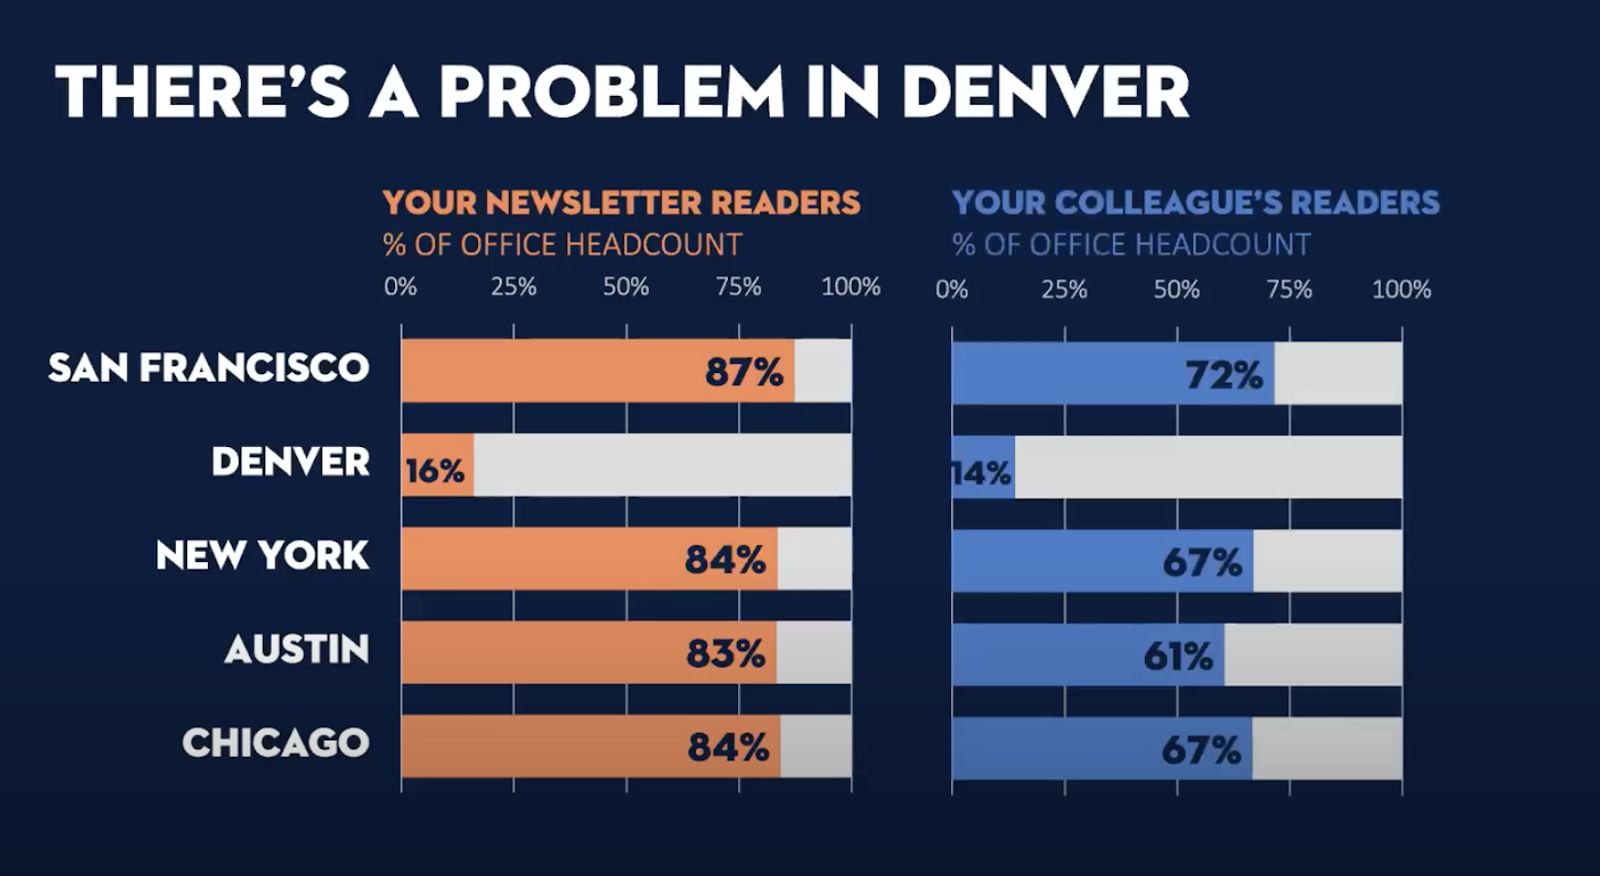 Side-by-side bar charts comparing your newsletter readers (in orange against gray) to your colleague's readers (in blue against gray)